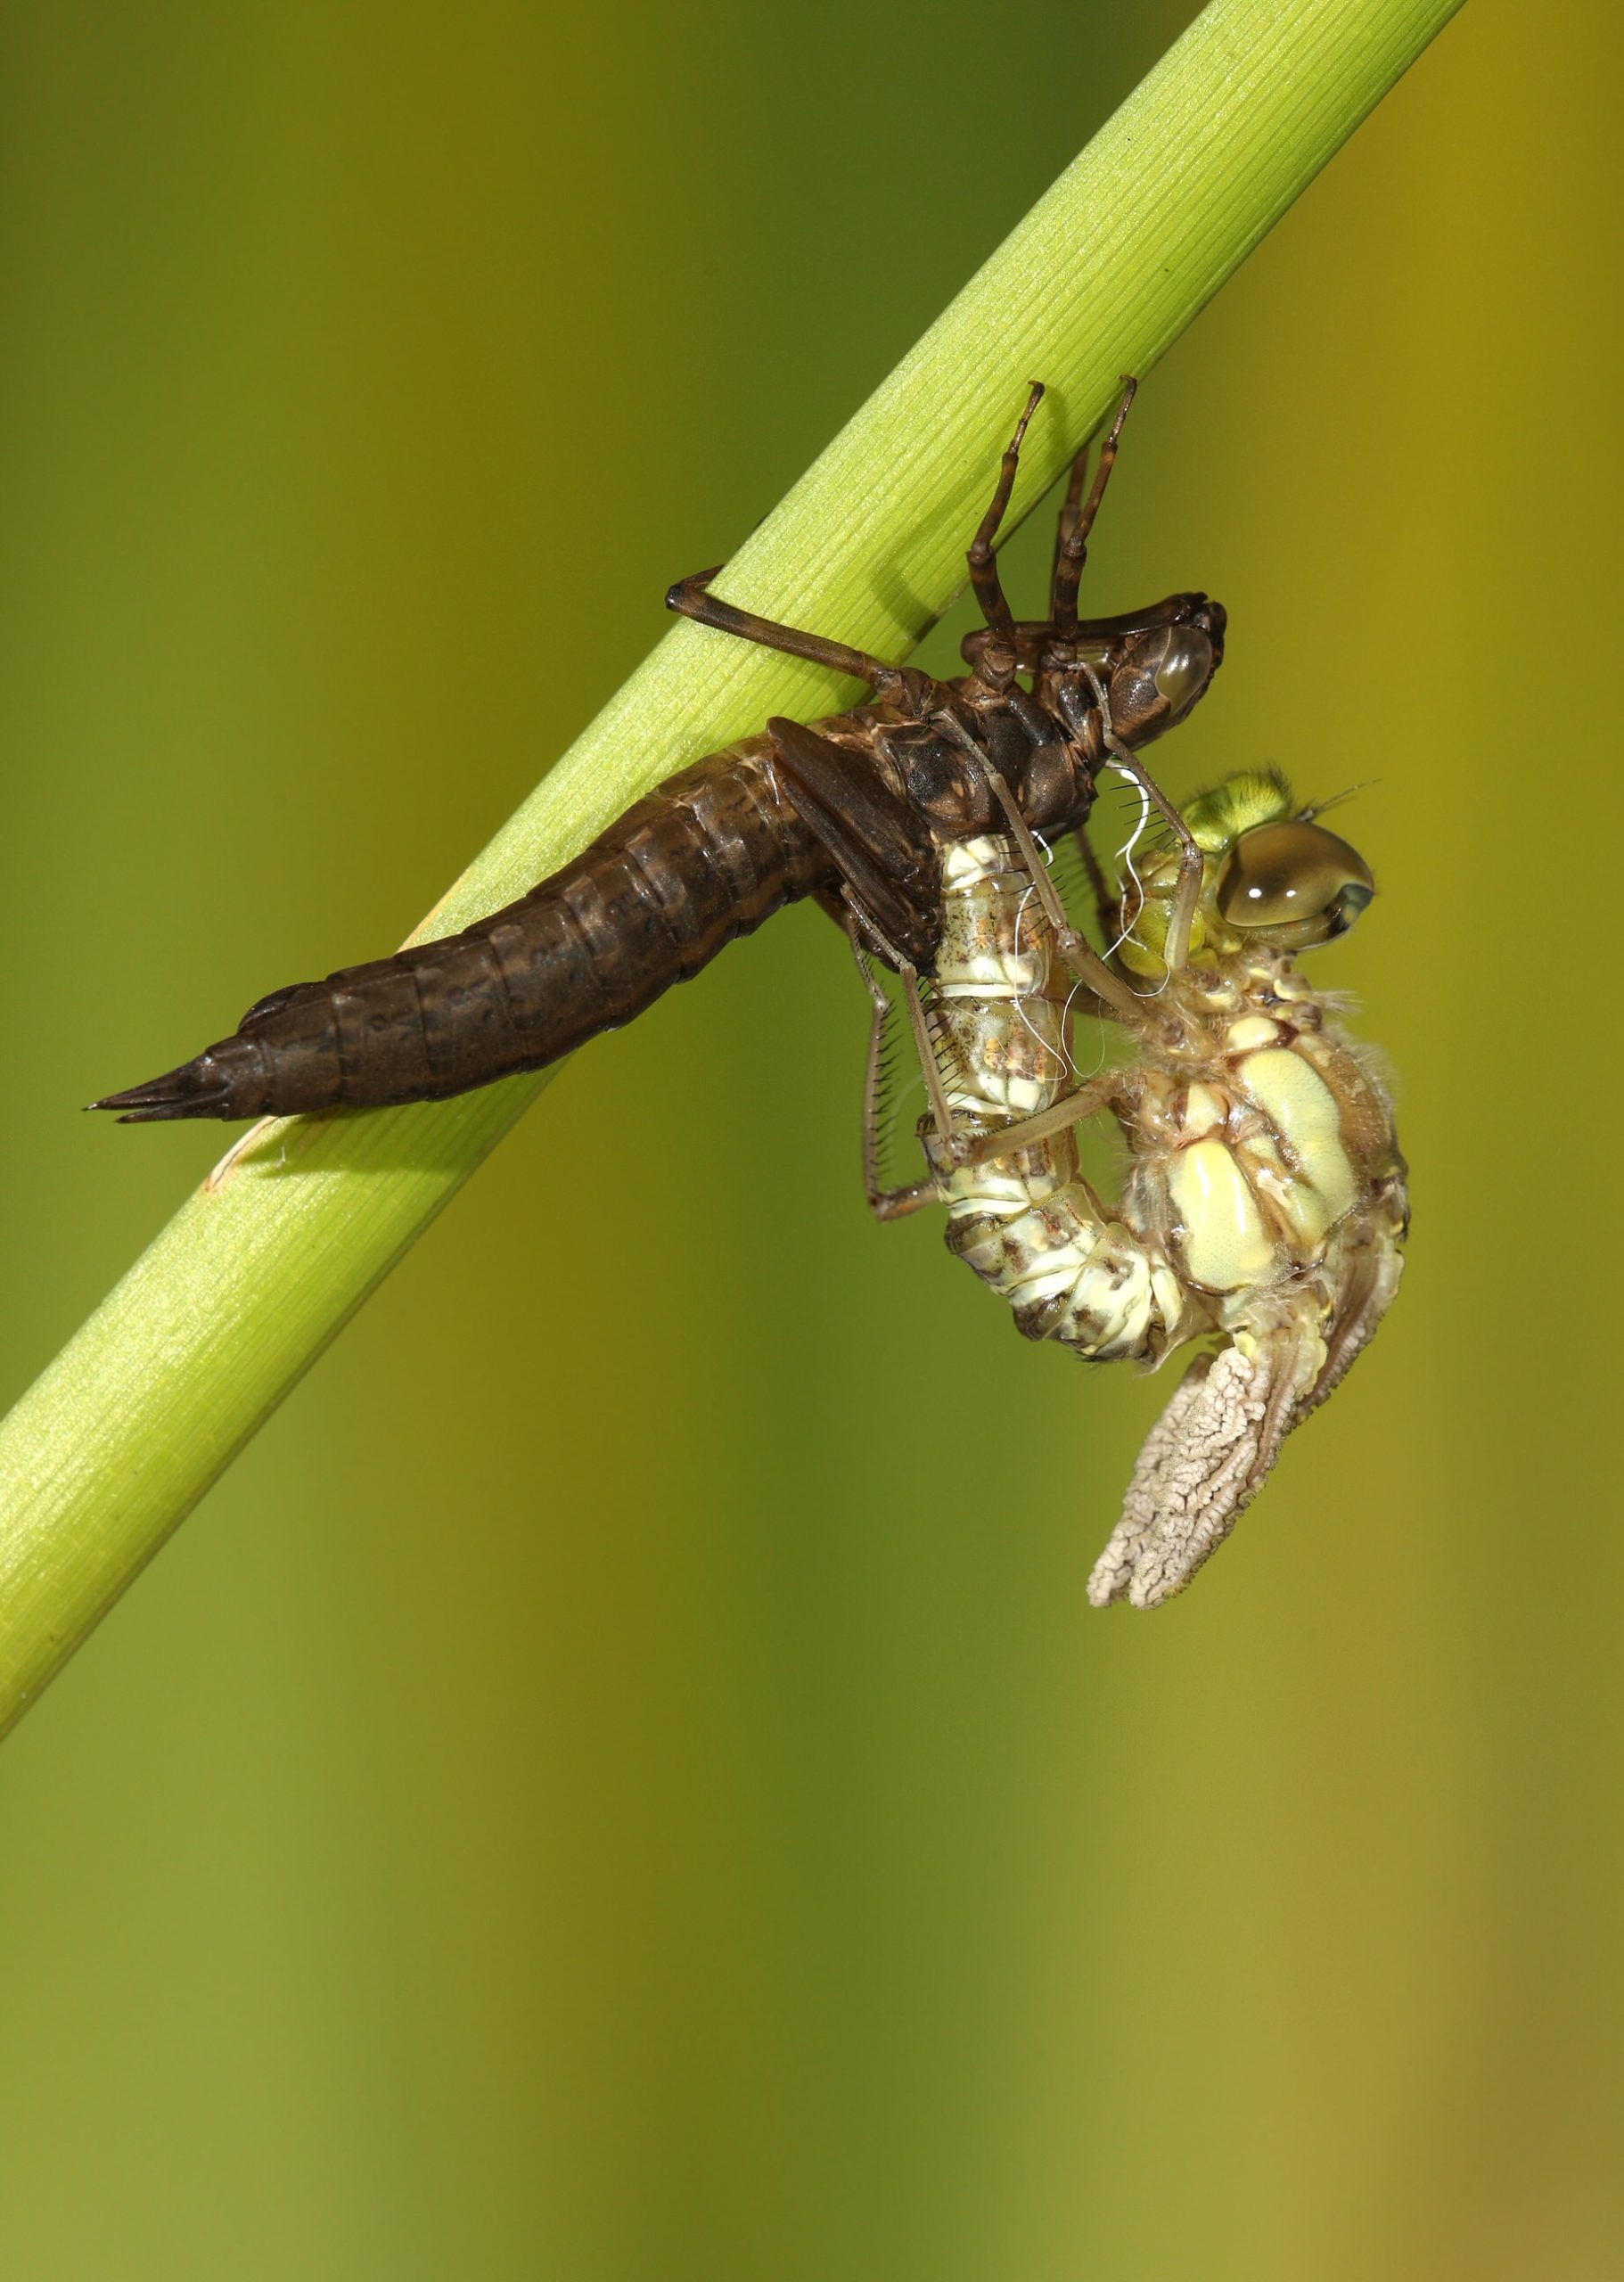 Souther Hawker Dragonfly, Aeshna Cyanea, Emerging From Nymph